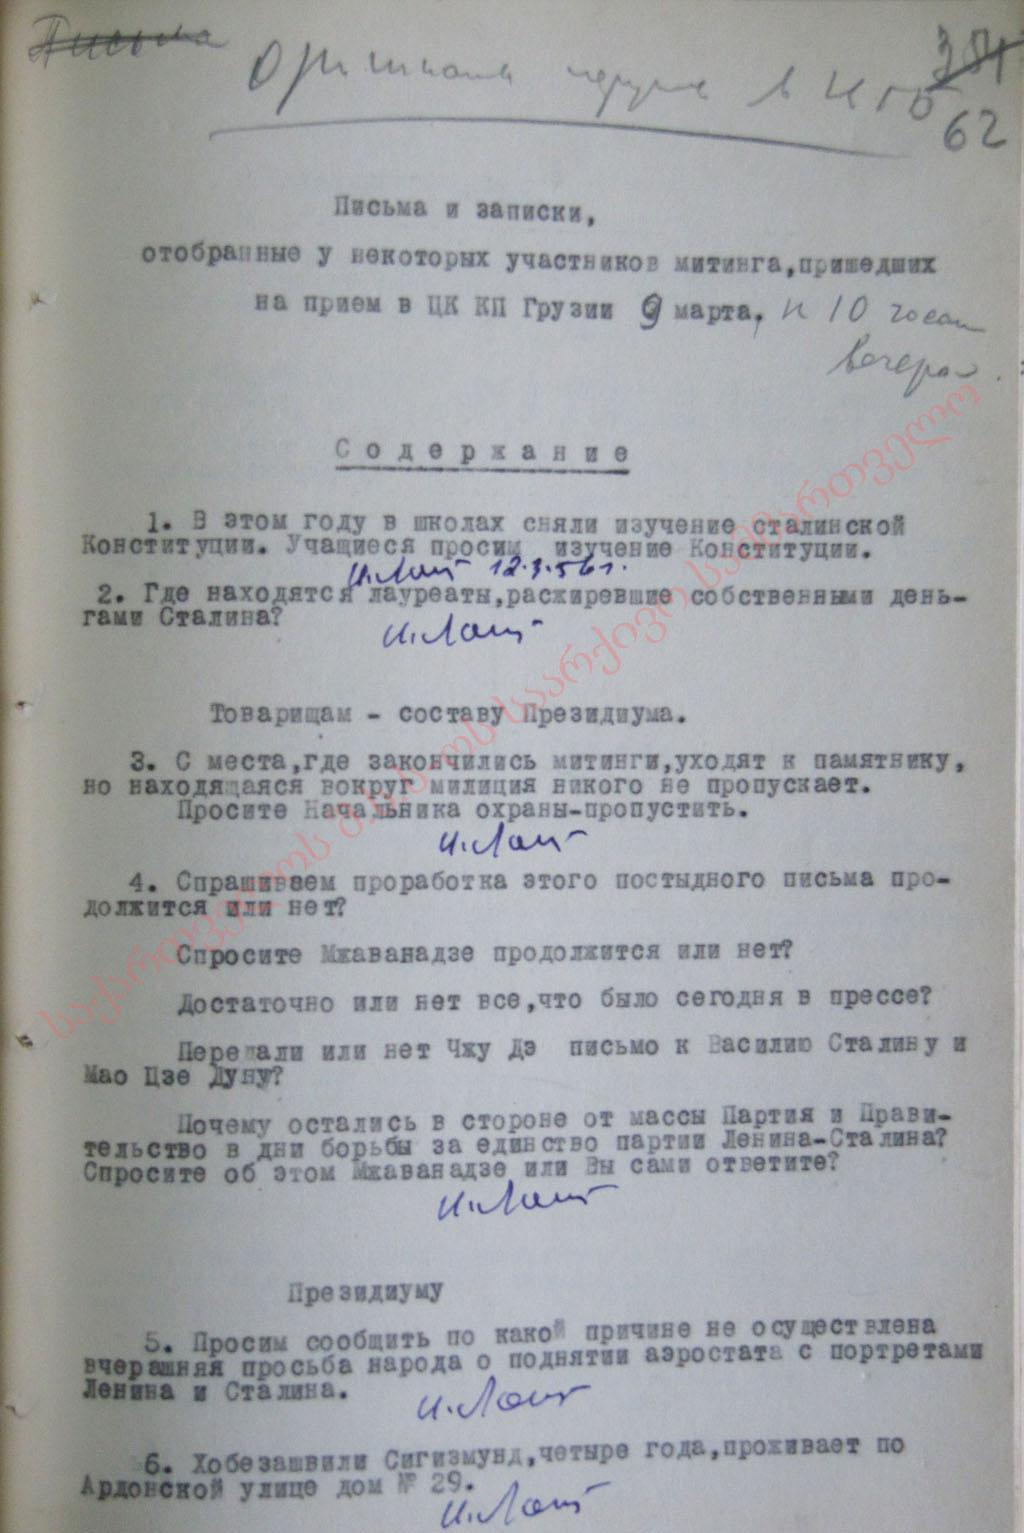 Notes and letters taken away from the activists that came to the reception at the Central Committee of Communist Party of Georgia in the evening of March 9th, 1956.